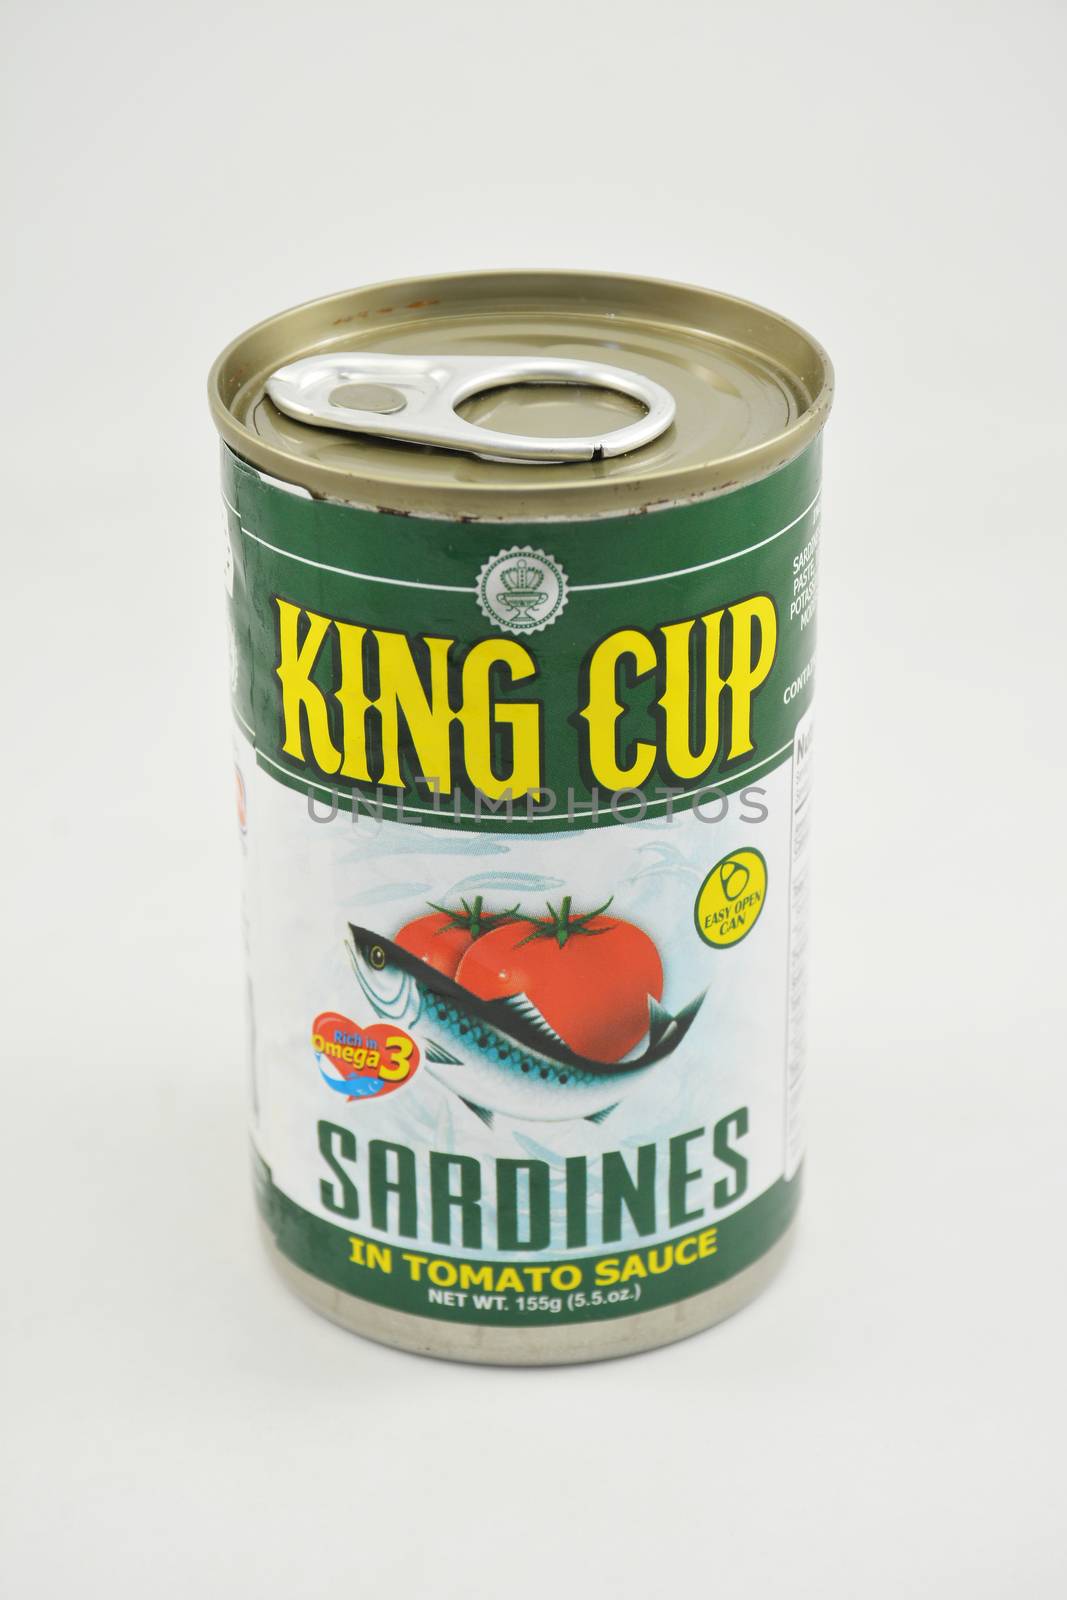 MANILA, PH - JUNE 26 - King cup sardines can on June 26, 2020 in Manila, Philippines.